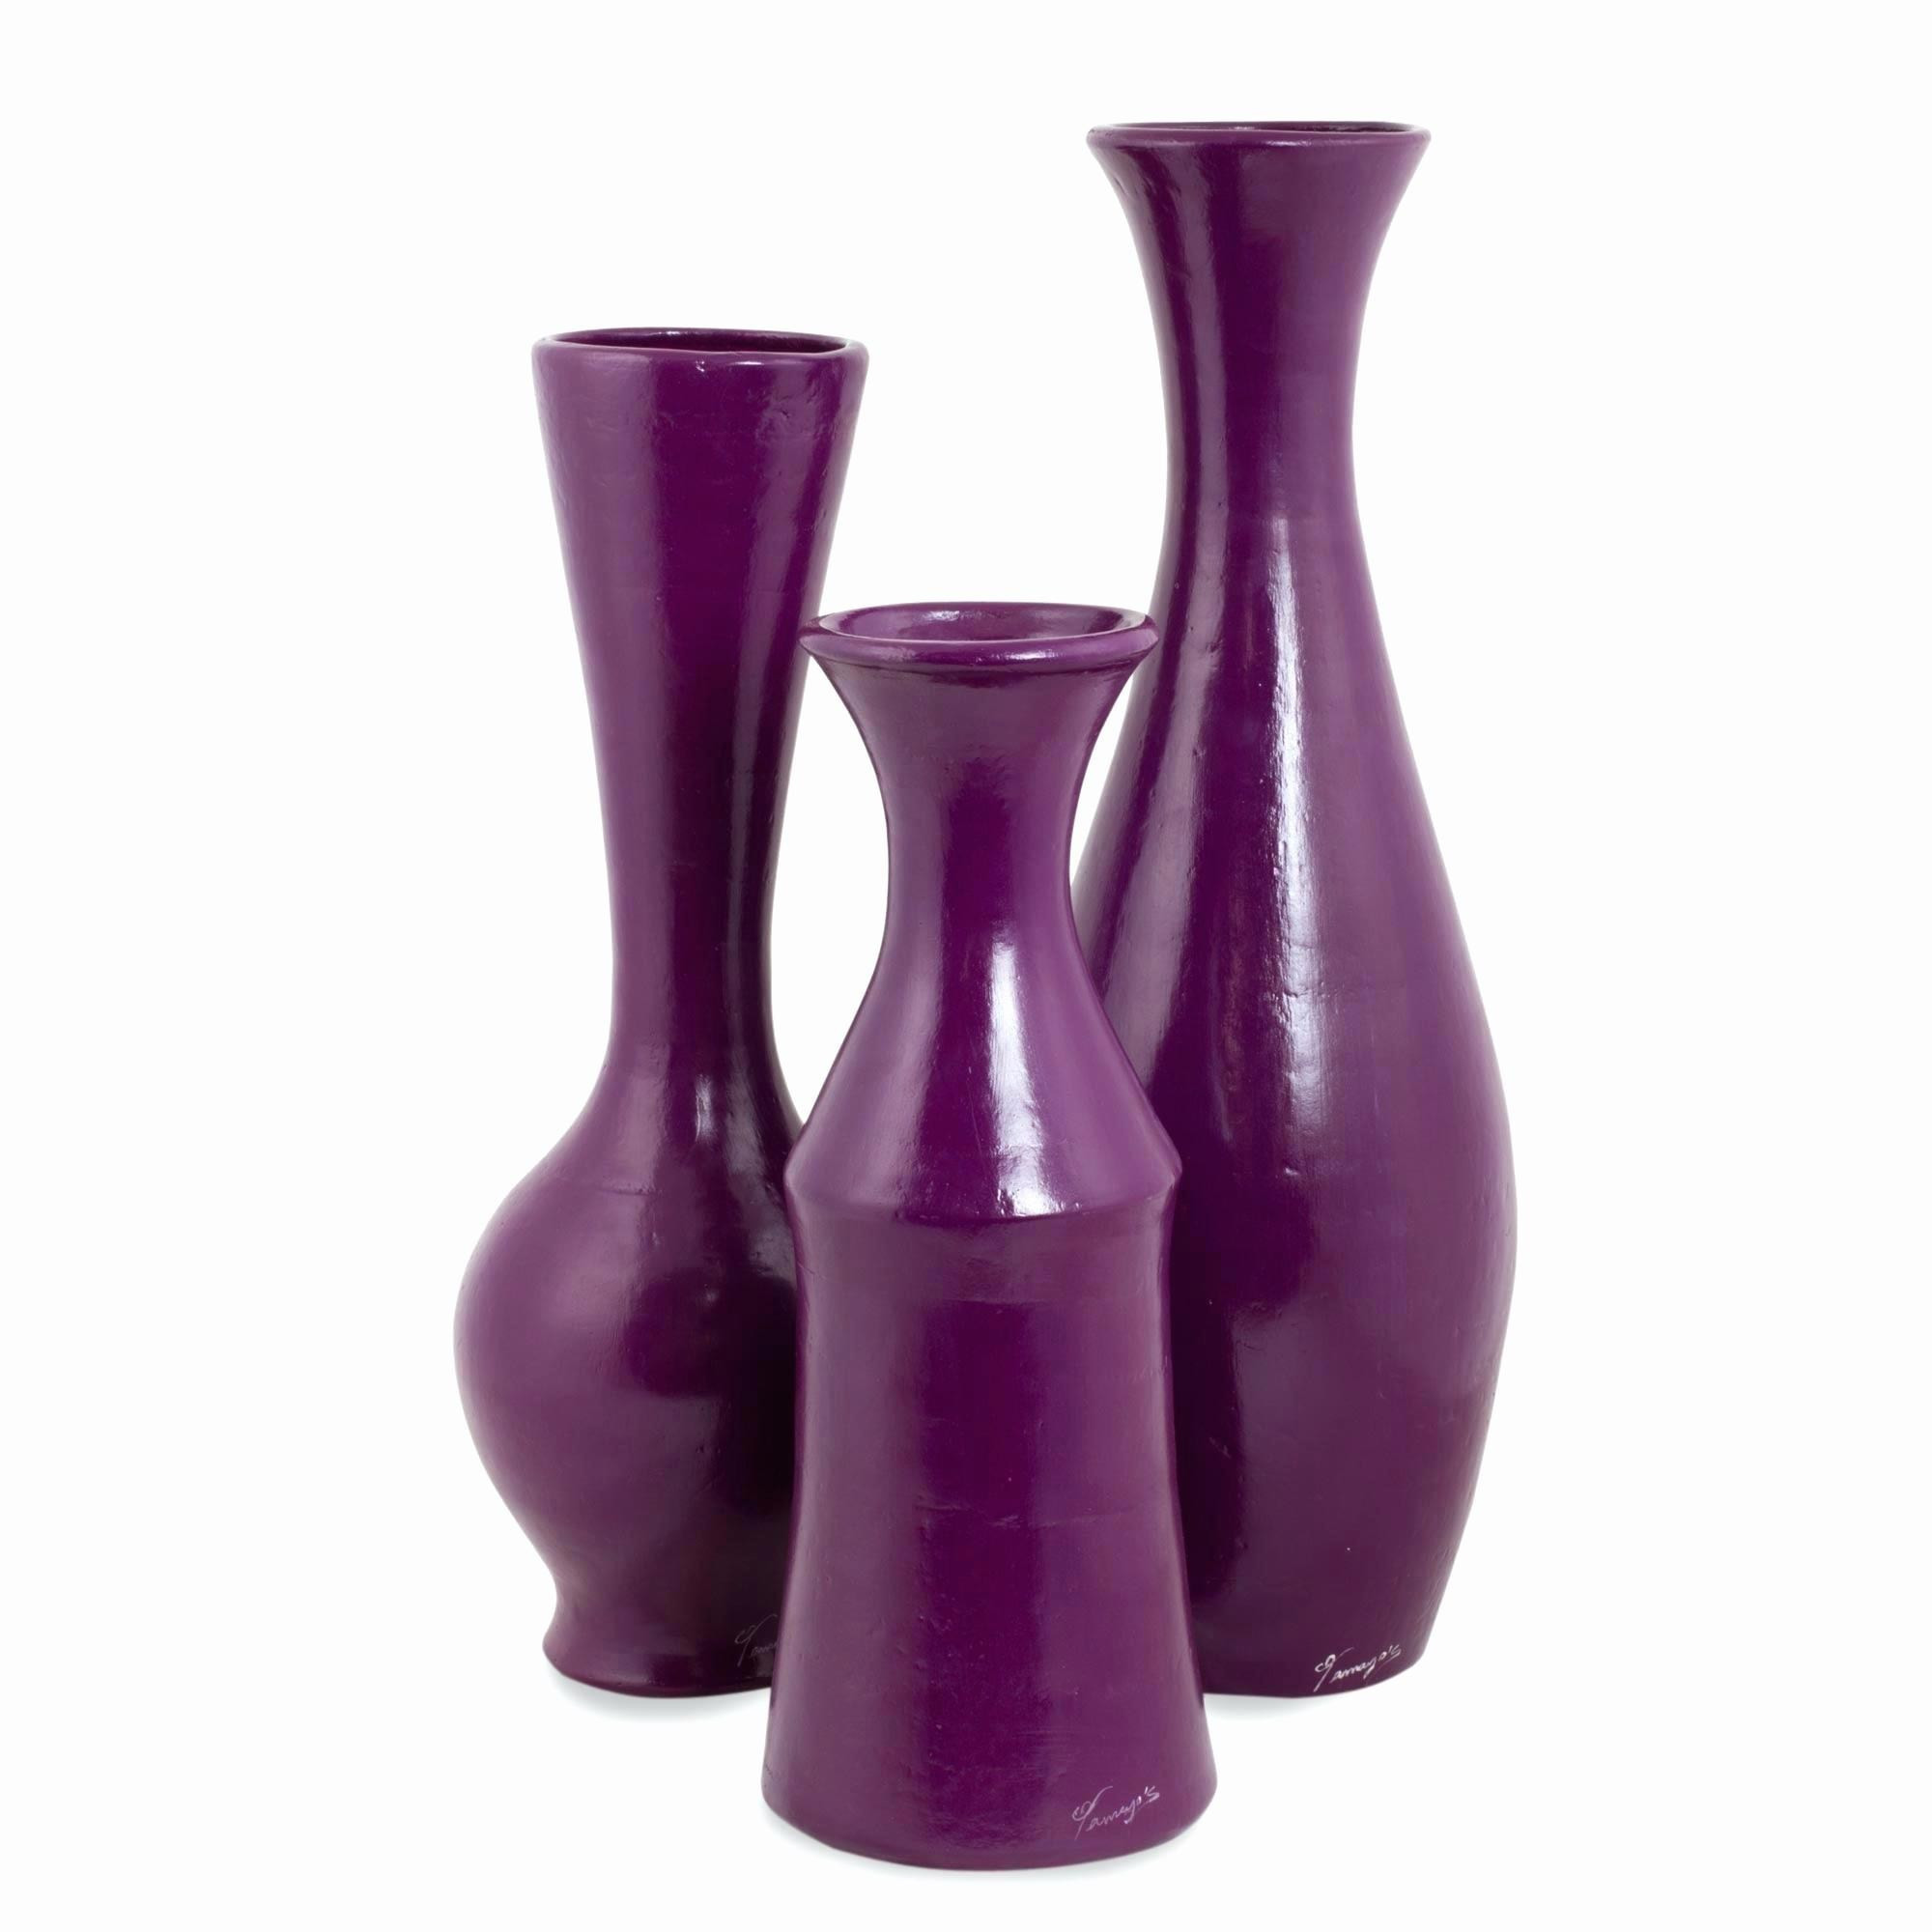 26 Amazing the Portland Vase 2024 free download the portland vase of cheap wedding favors in bulk inspirational wedding favors bulk cheap intended for cheap wedding favors in bulk awesome vases in bulk lovely awesome wedding favors bulk c